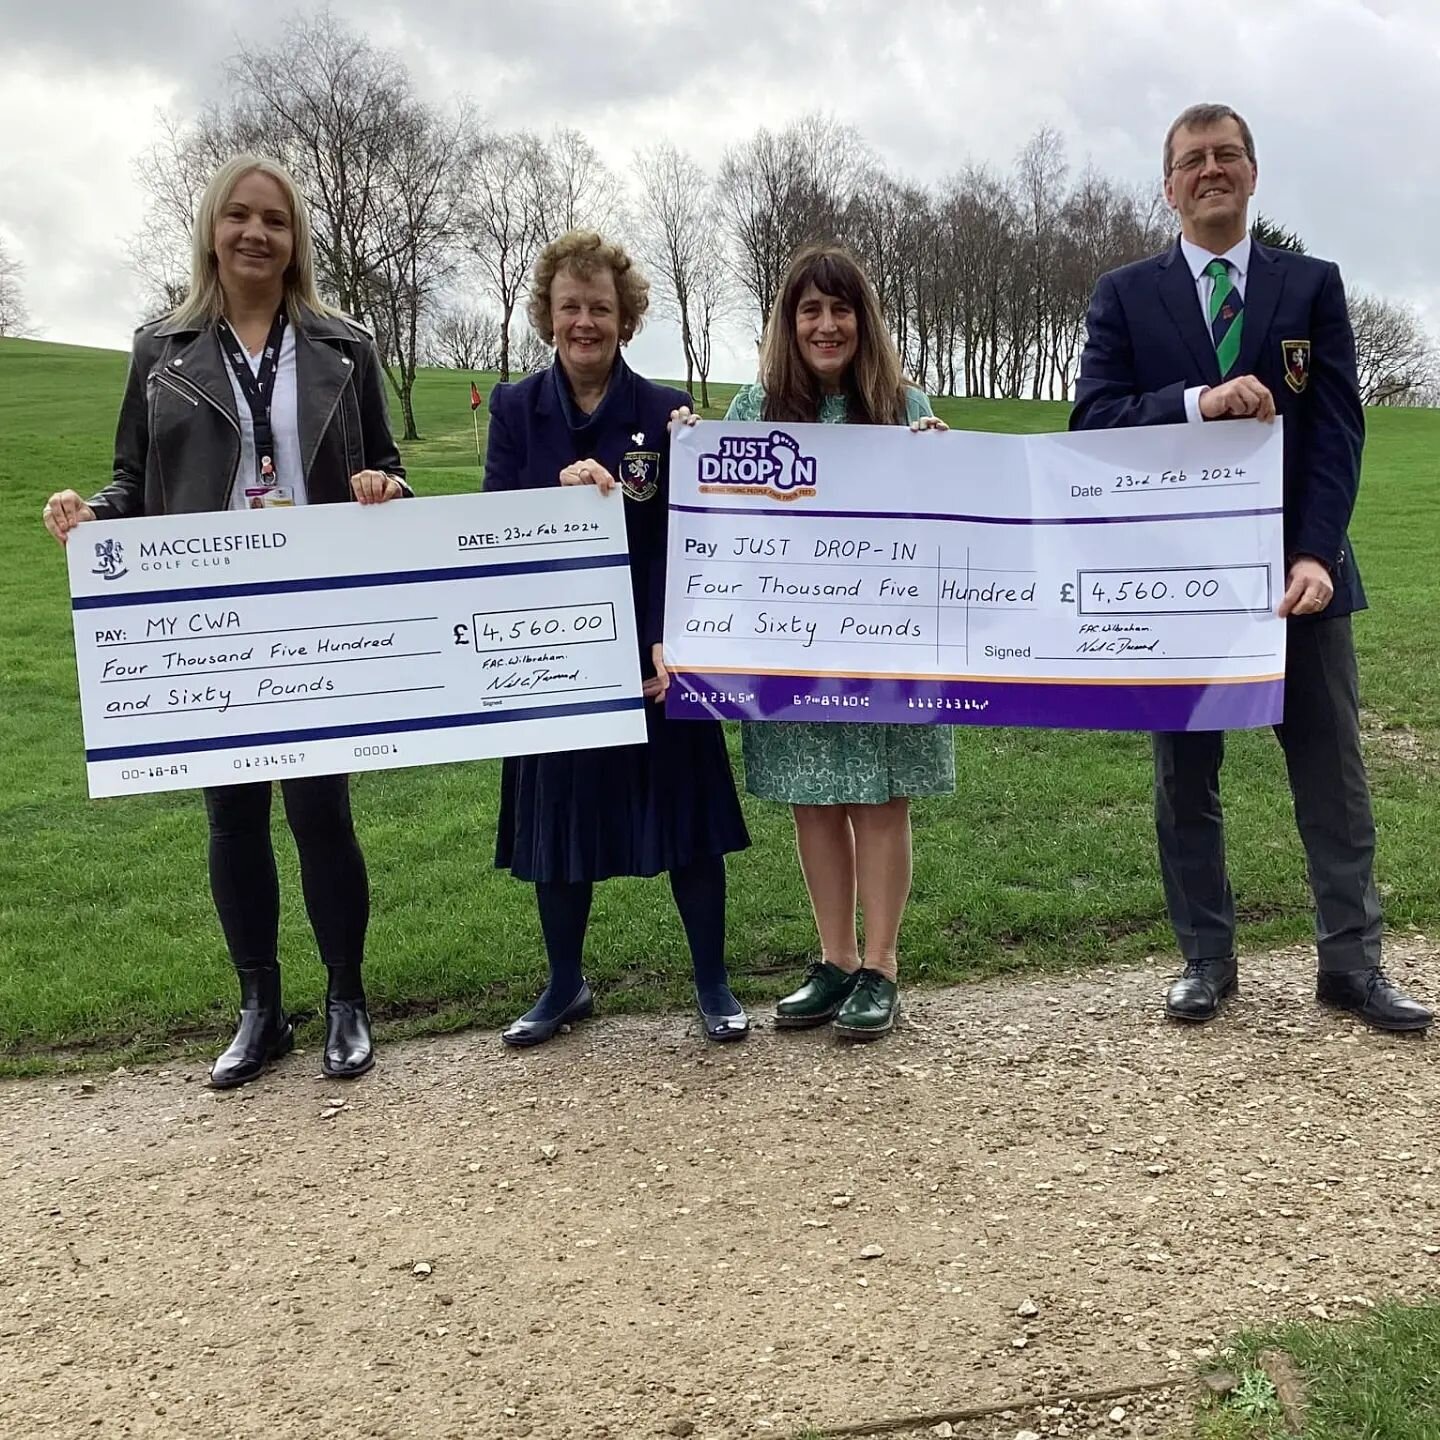 Huge and heartfelt thanks to @macclesfieldgolfclub for their support over the past year&nbsp;❤️&nbsp;&ndash;&nbsp;we were delighted to accept your donation and cannot tell you how much your generosity means to us at a time when we've been given no ch